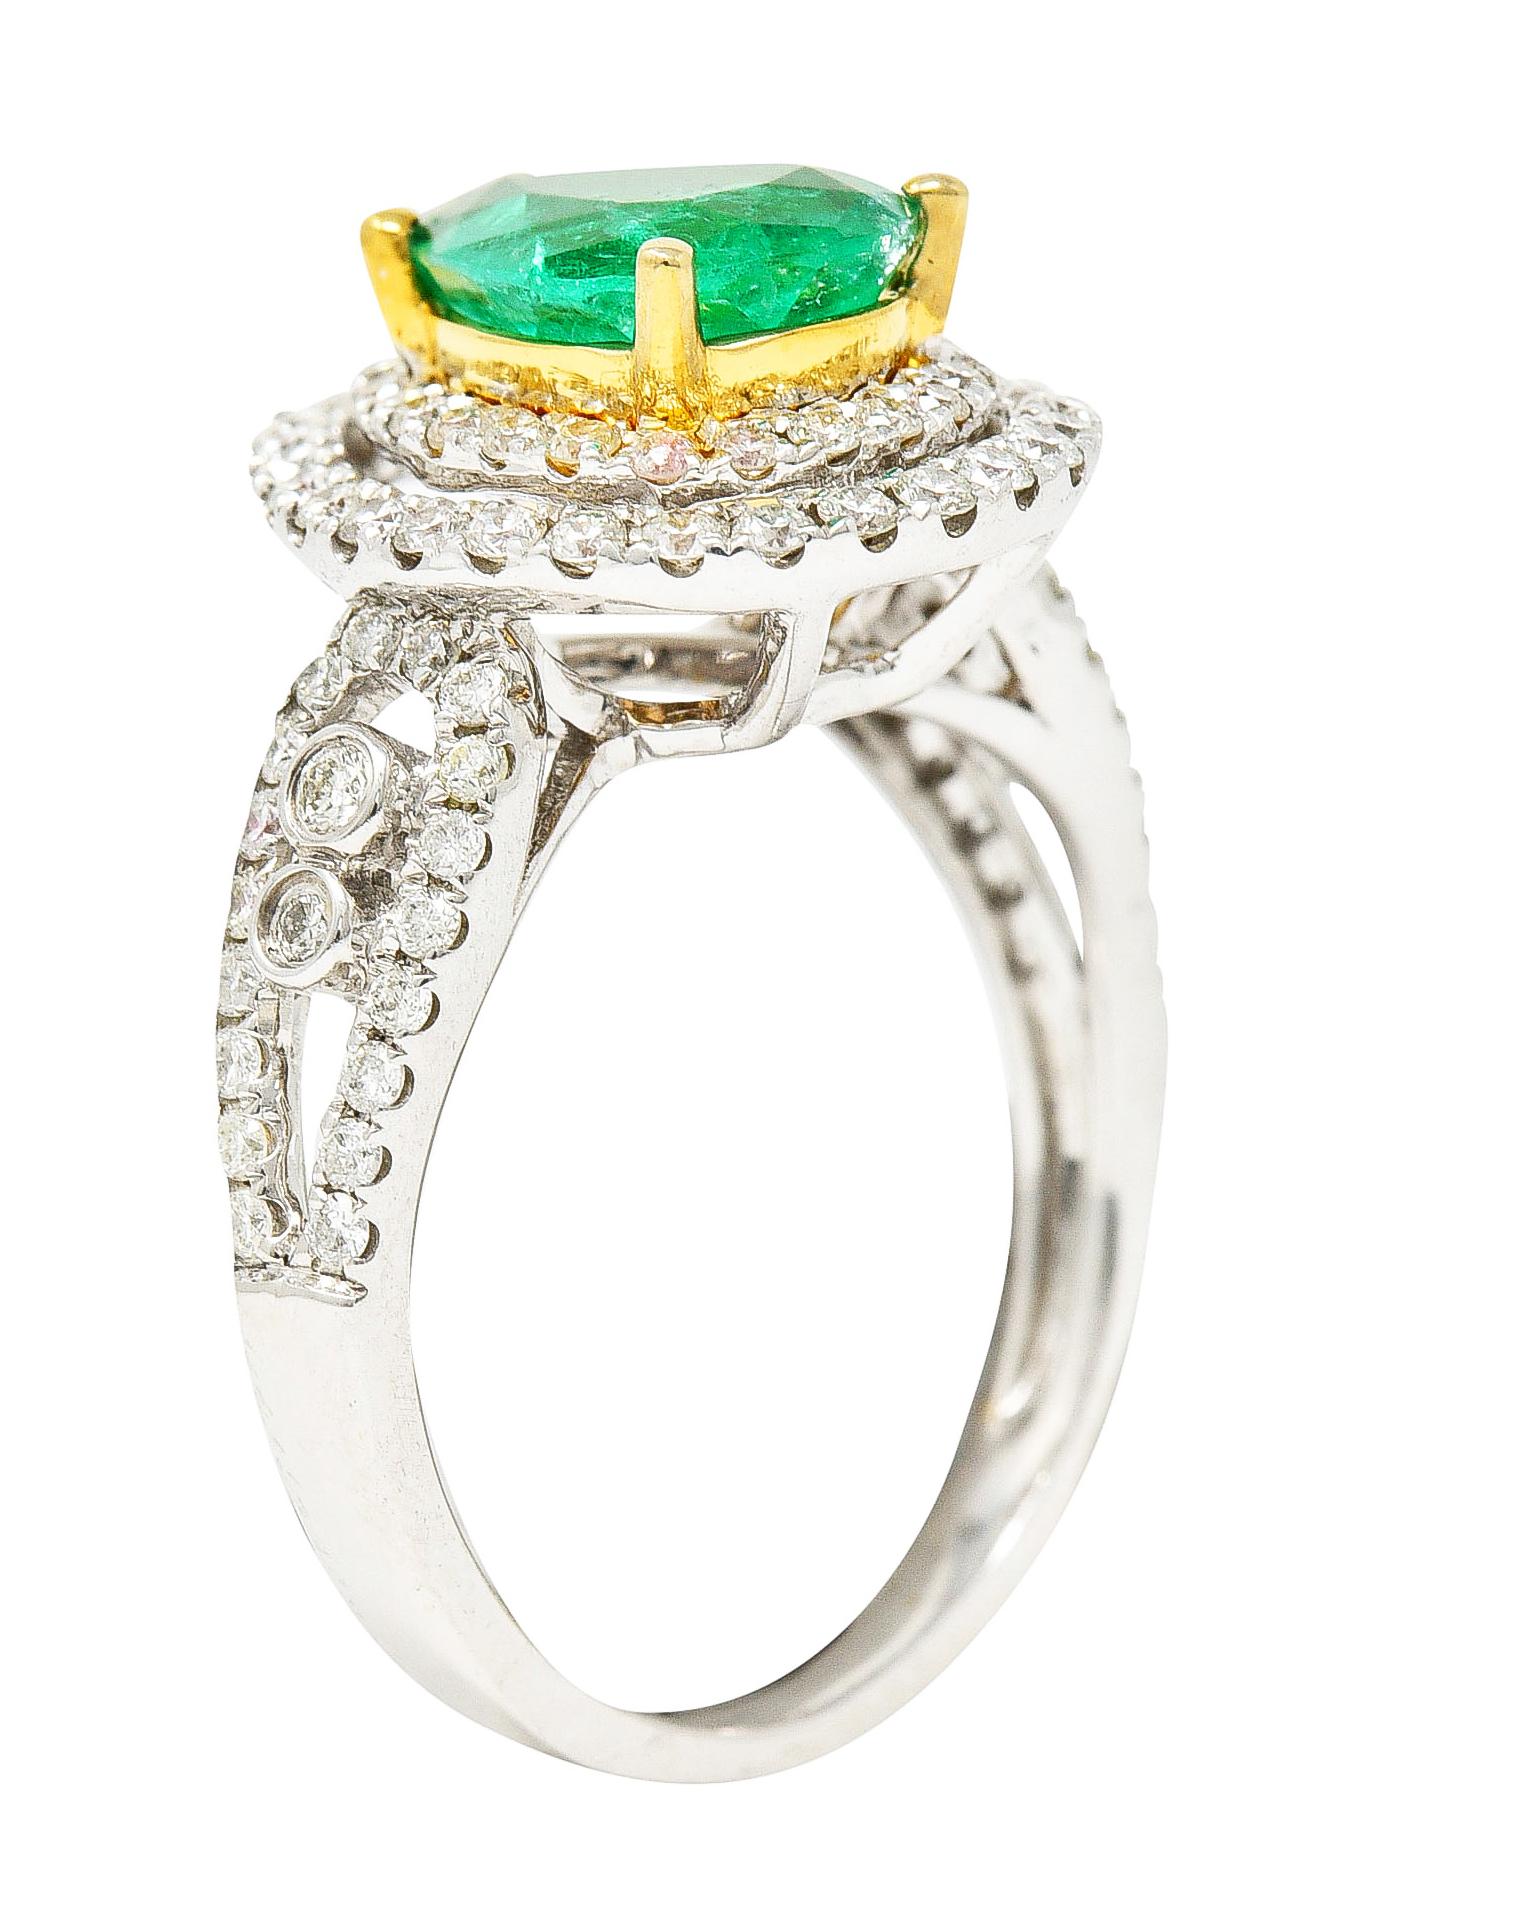 Cluster ring centers a pear cut emerald weighing approximately 1.50 carats. Bluish green in color and semi-transparent with natural inclusions. Set in yellow gold and surrounded by a double diamond halo. And flanked by stylized split shoulders